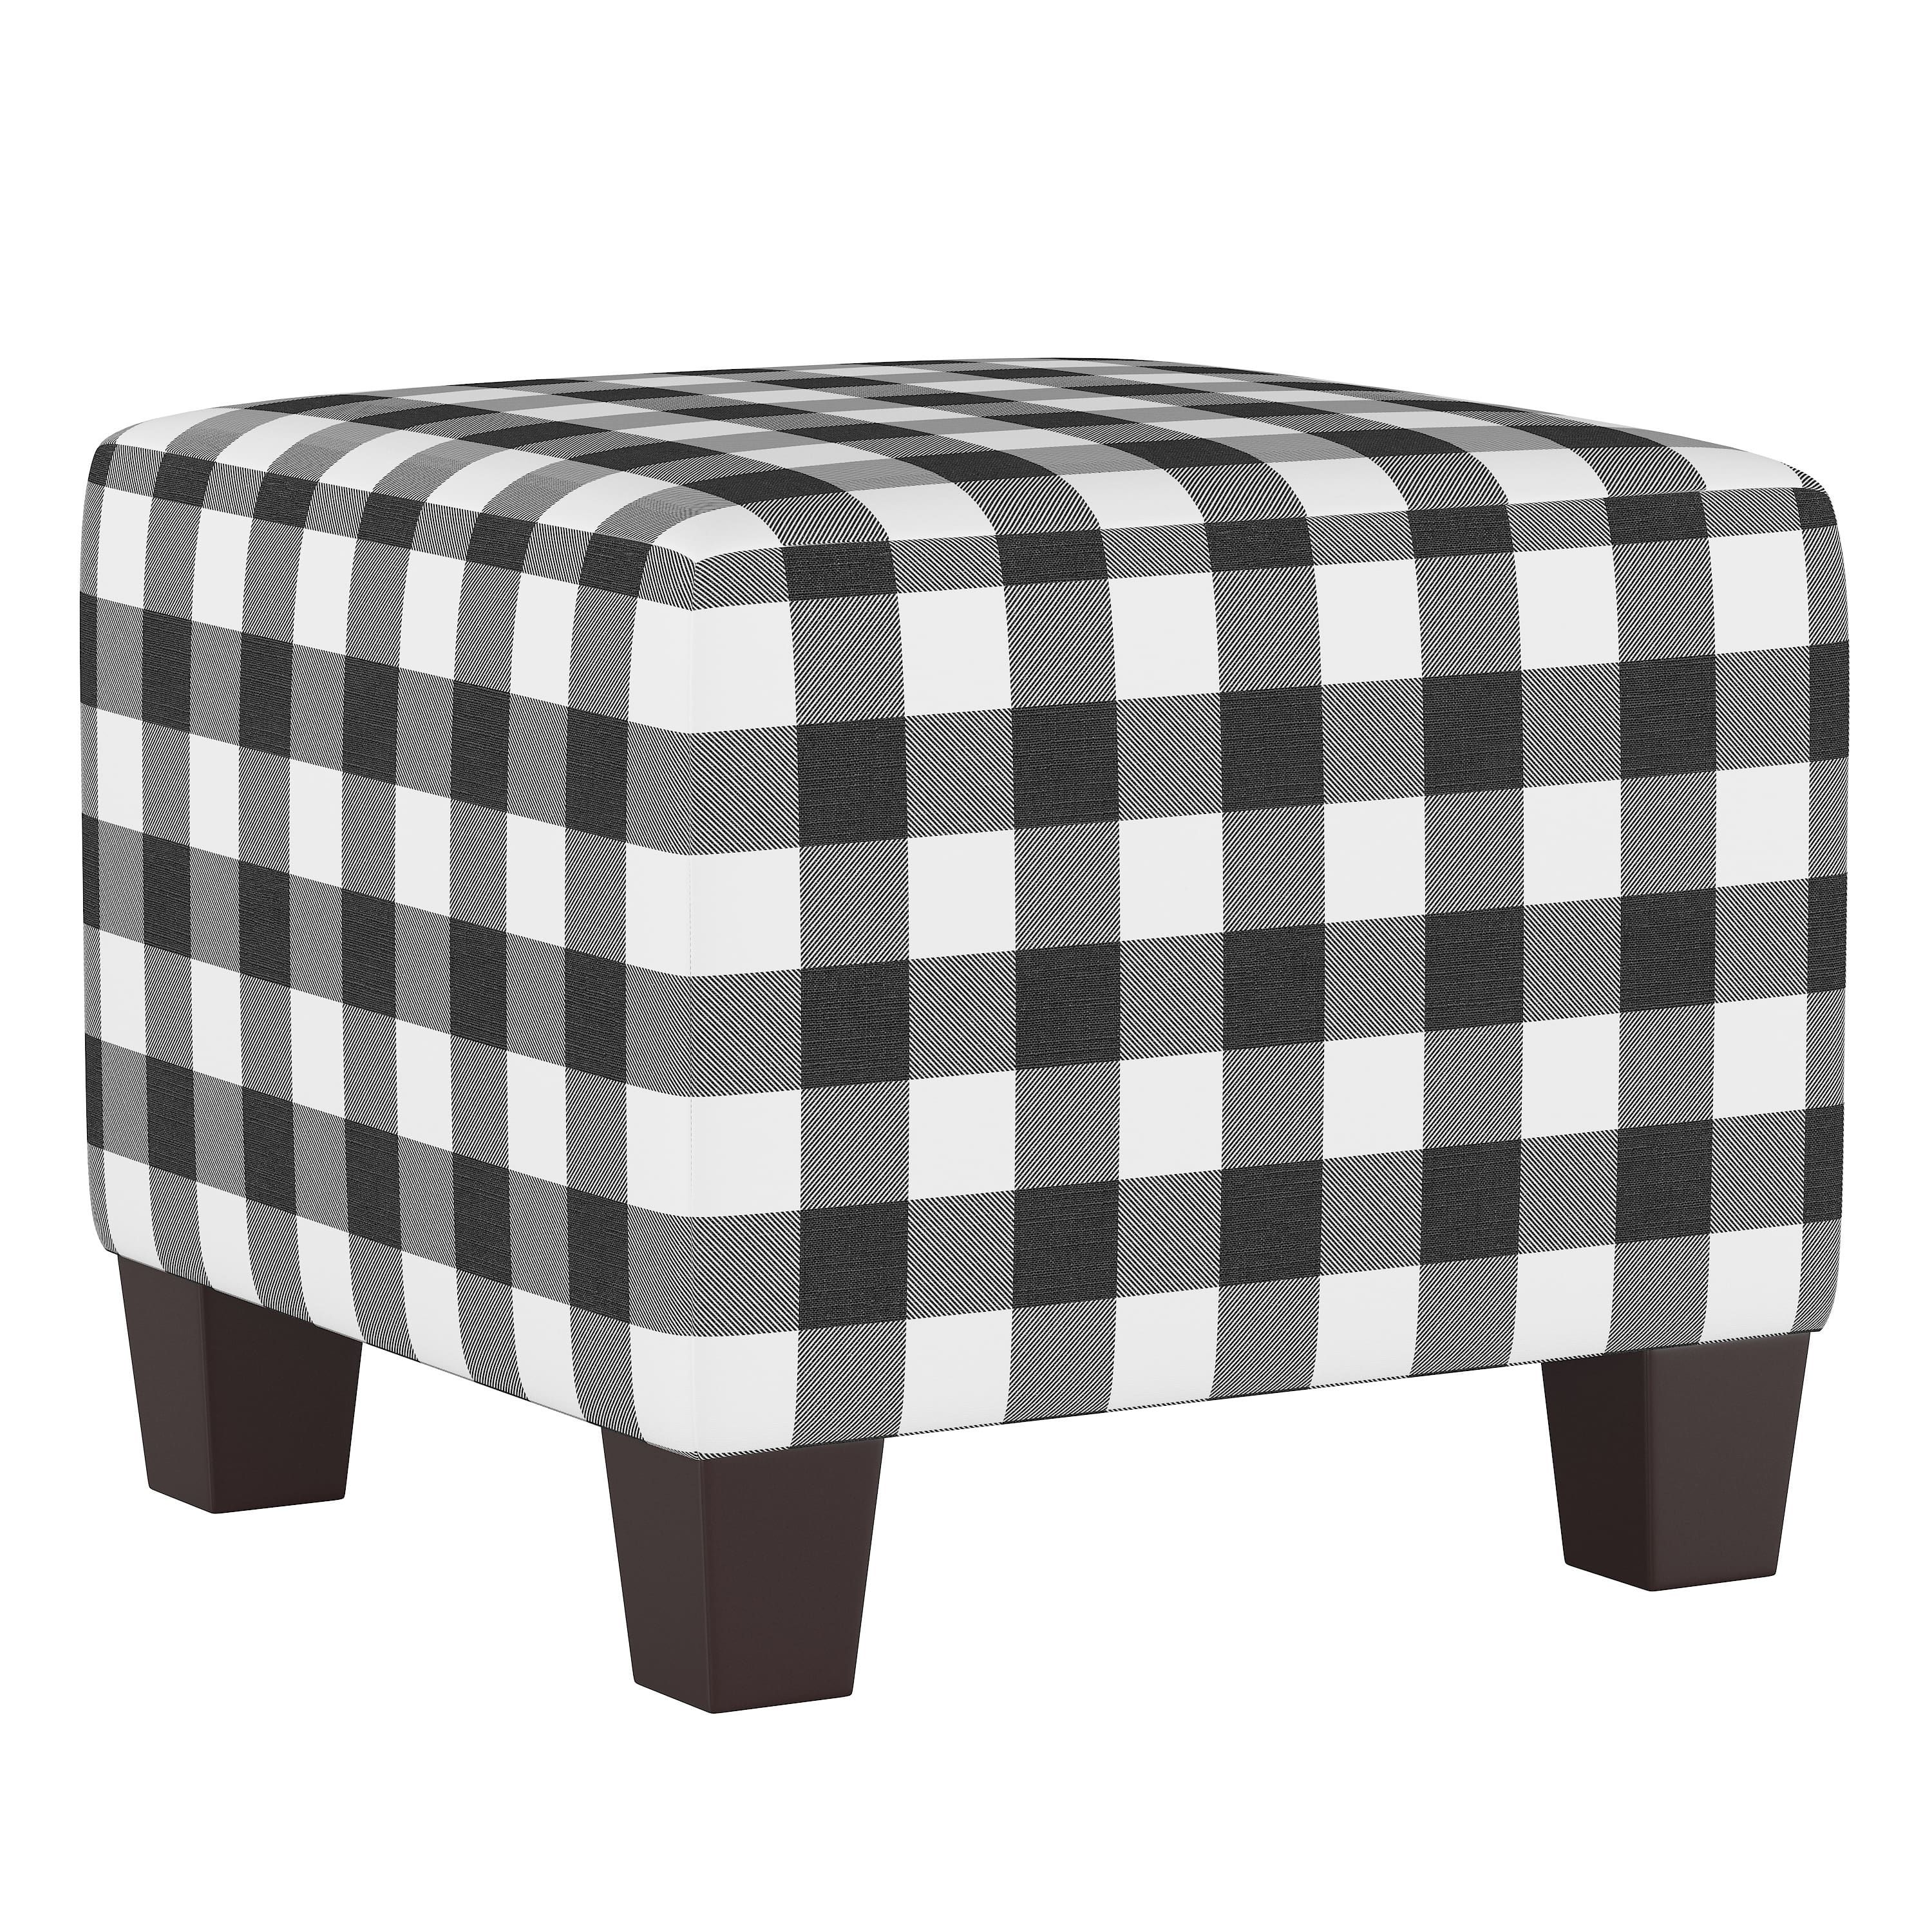 Skyline Furniture Square Ottoman in Classic Gingham Black | Bed Bath & Beyond